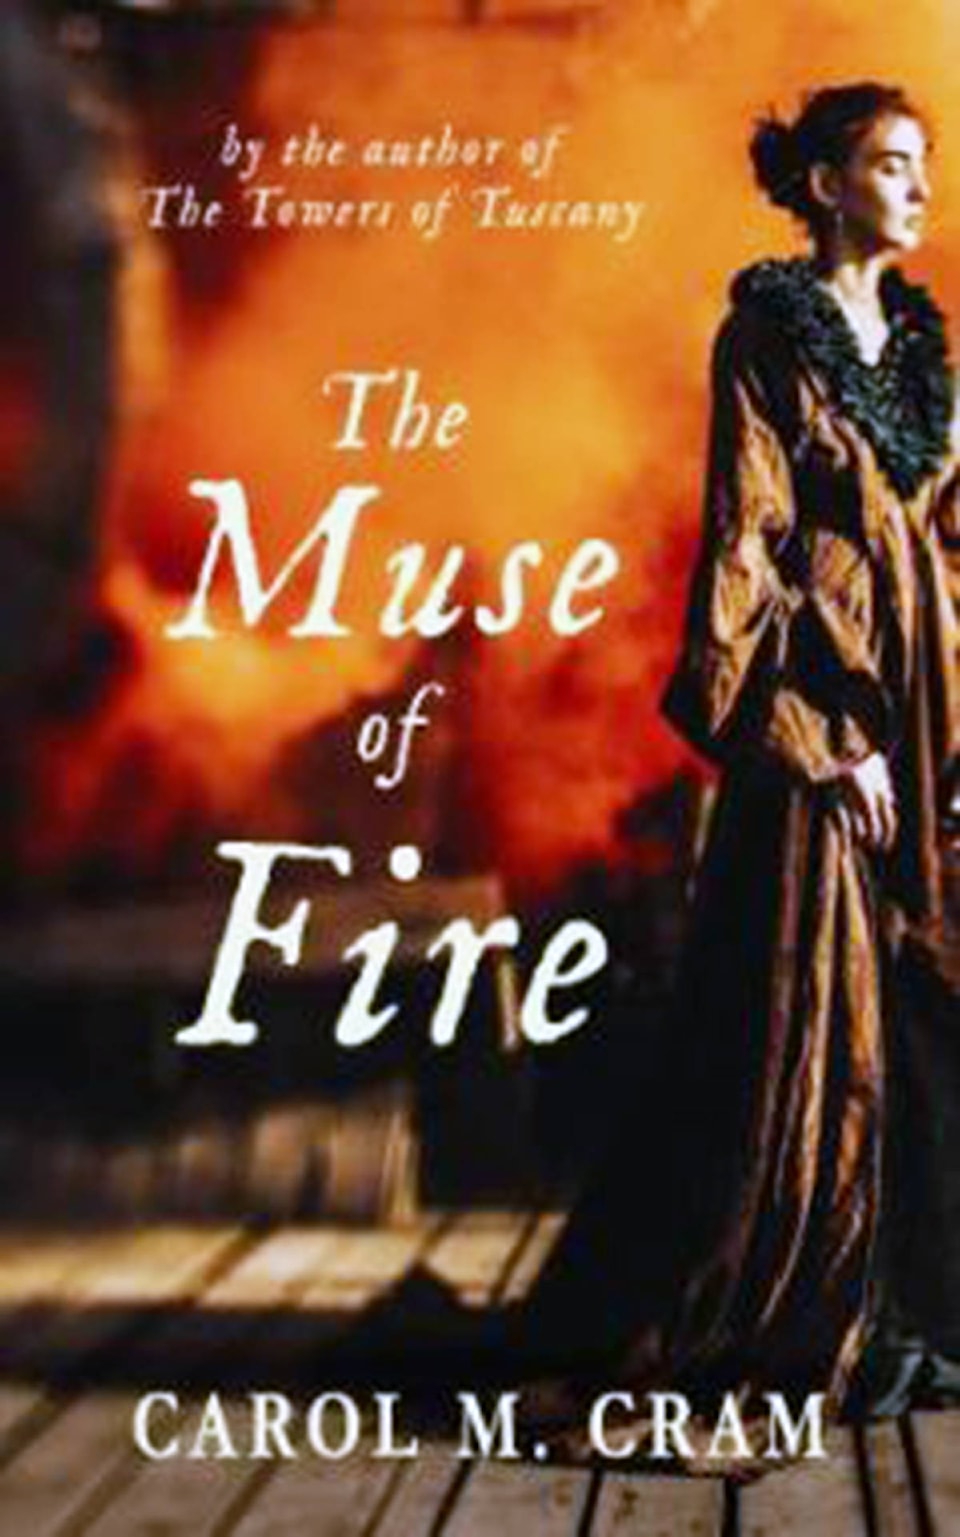 10765387_web1_Muse-of-Fire